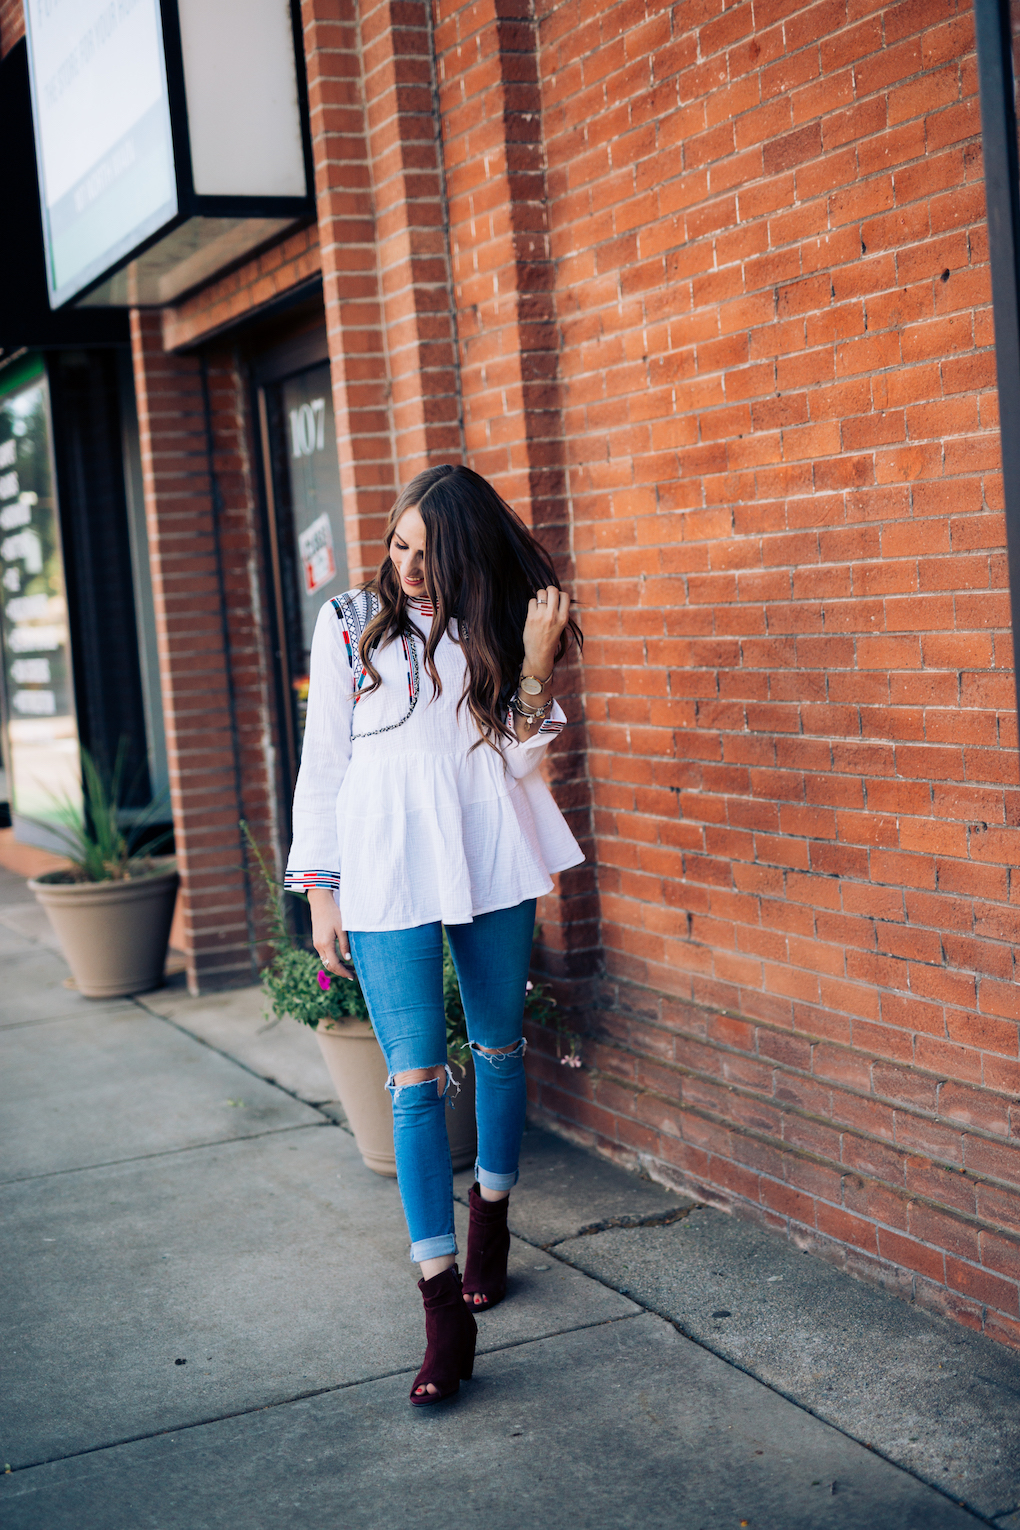 Girl in white peplum top with bright colored embroidery and skinny jeans with maroon booties